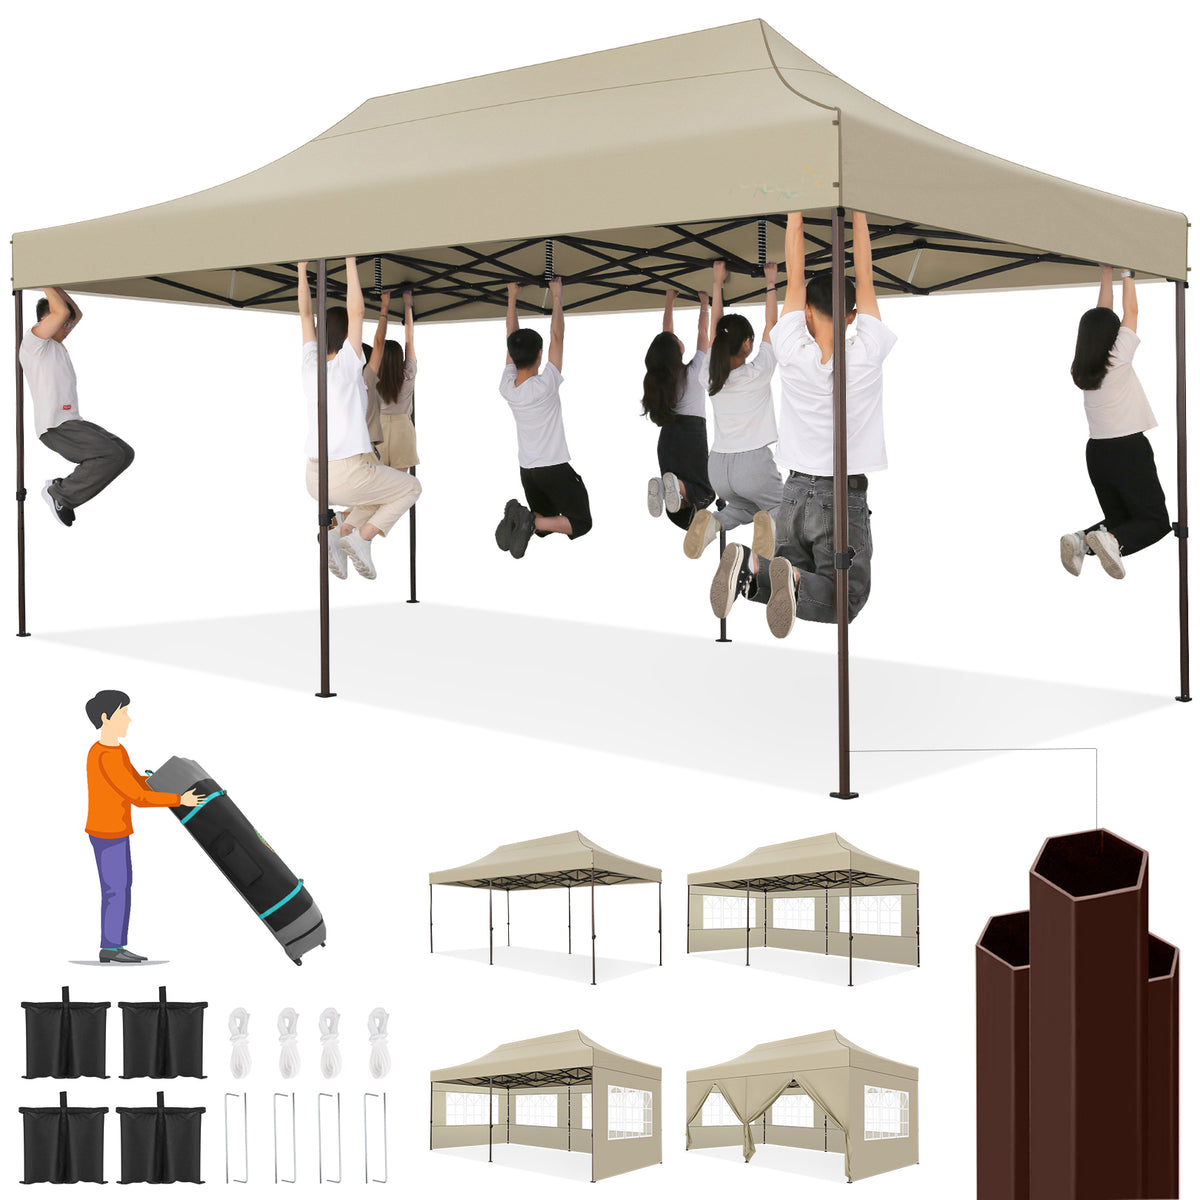 HOTEEL 10x20 Heavy Duty Canopy Tent with 6 Removable Sidewalls,Pop up Outdoor Commercial Party Wedding Tent with Roller Bag,Waterproof & UV 50+,Khaki